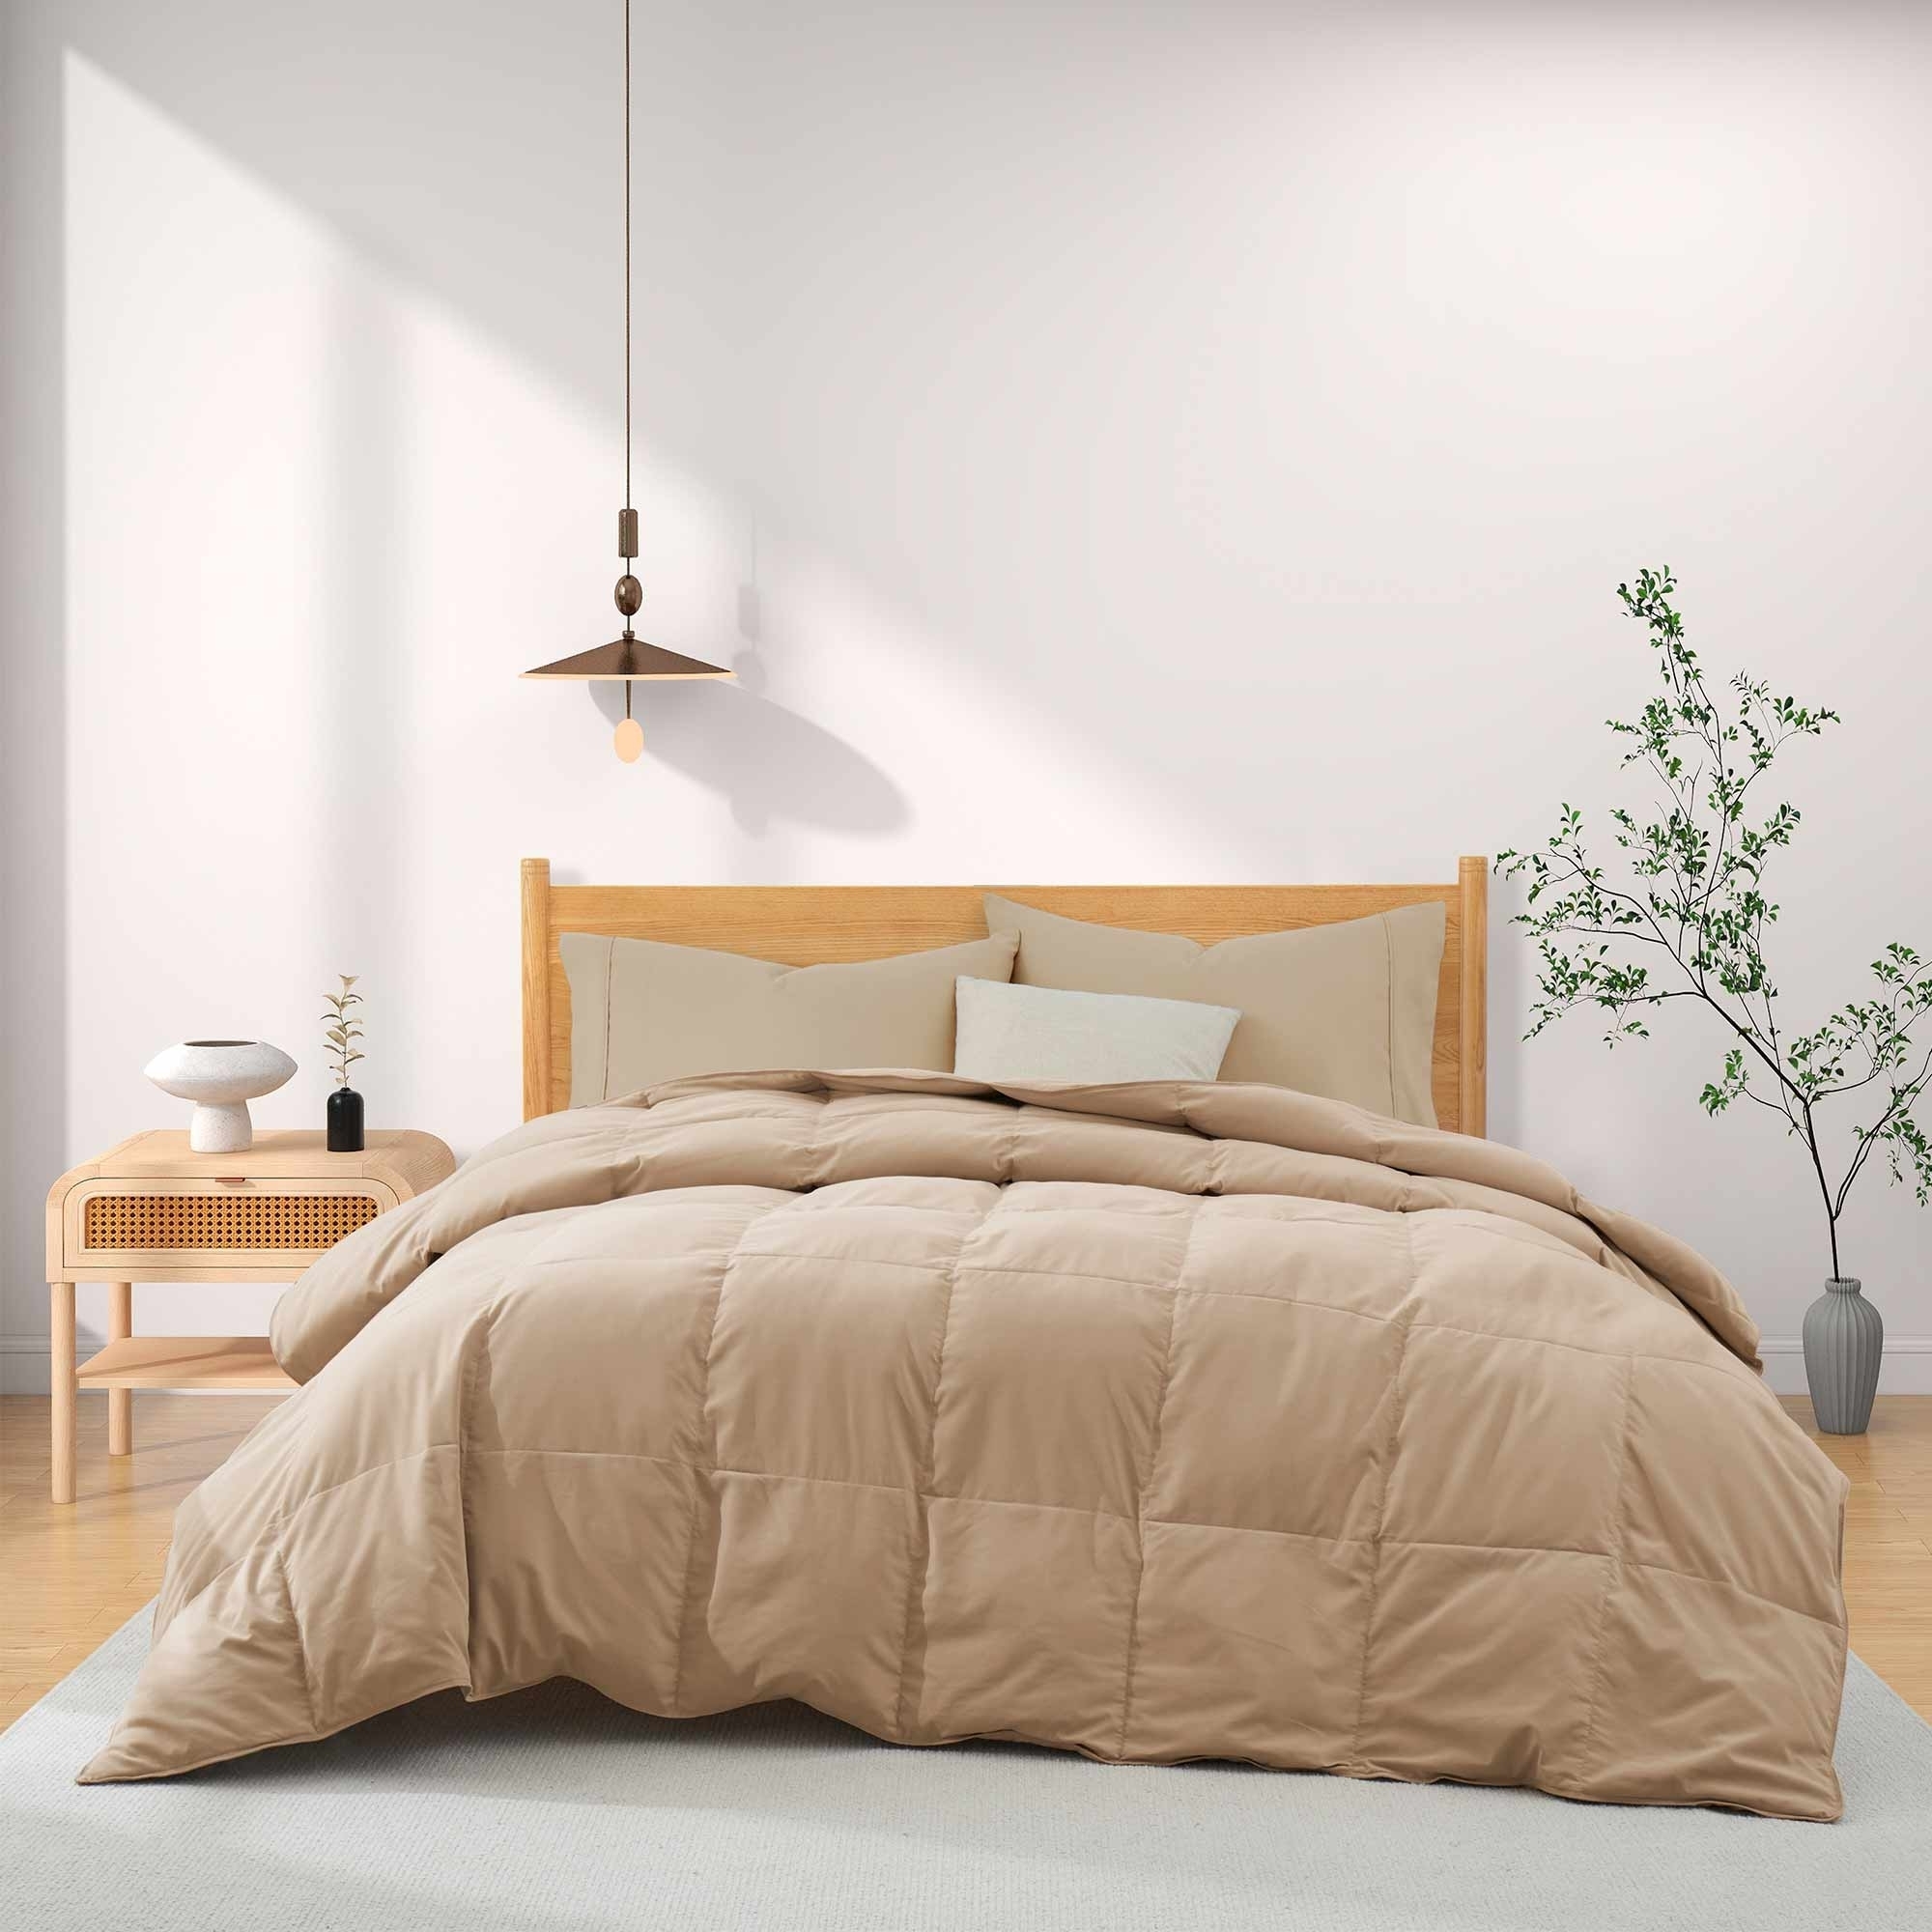 Lightweight Goose Feather And Down Comforter- Hotel Collection For Hot Sleepers - Ginger Root, Full